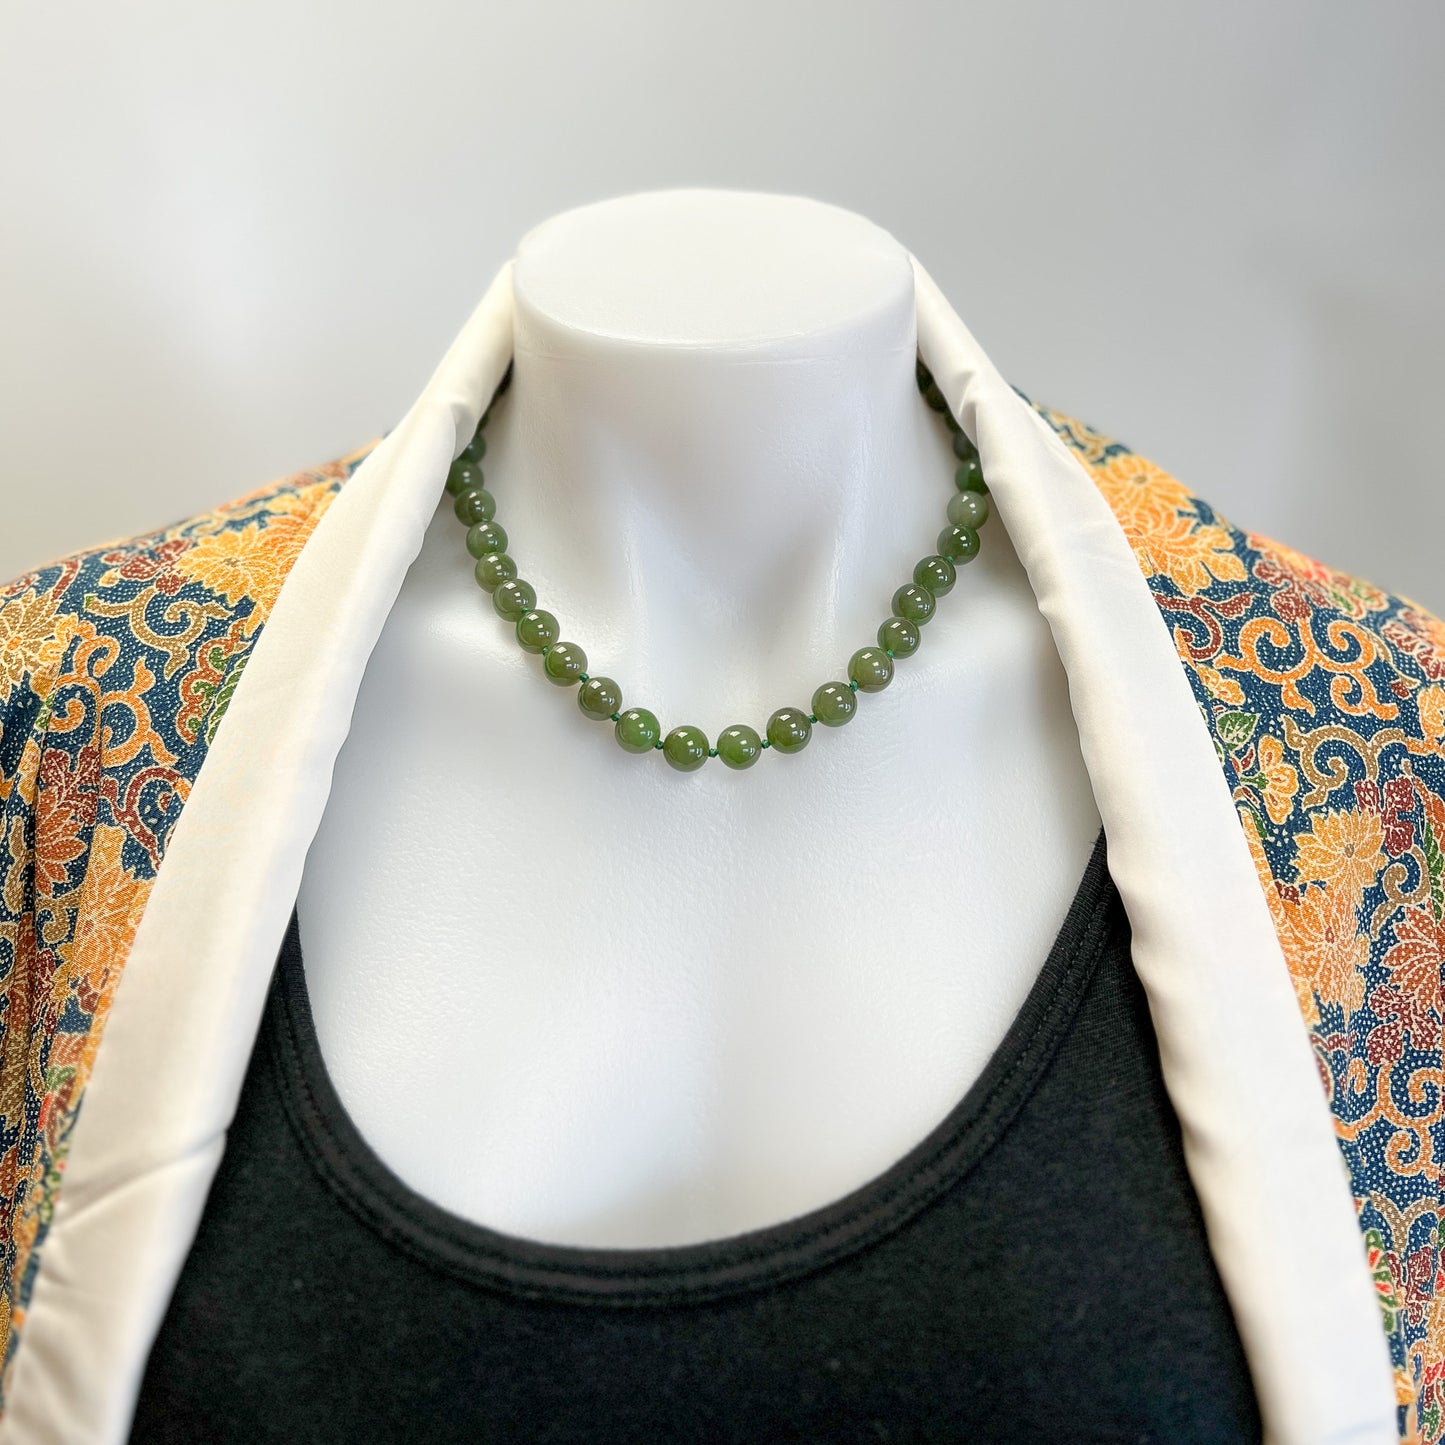 Canadian Jade 10mm Round Bead Knotted Necklace